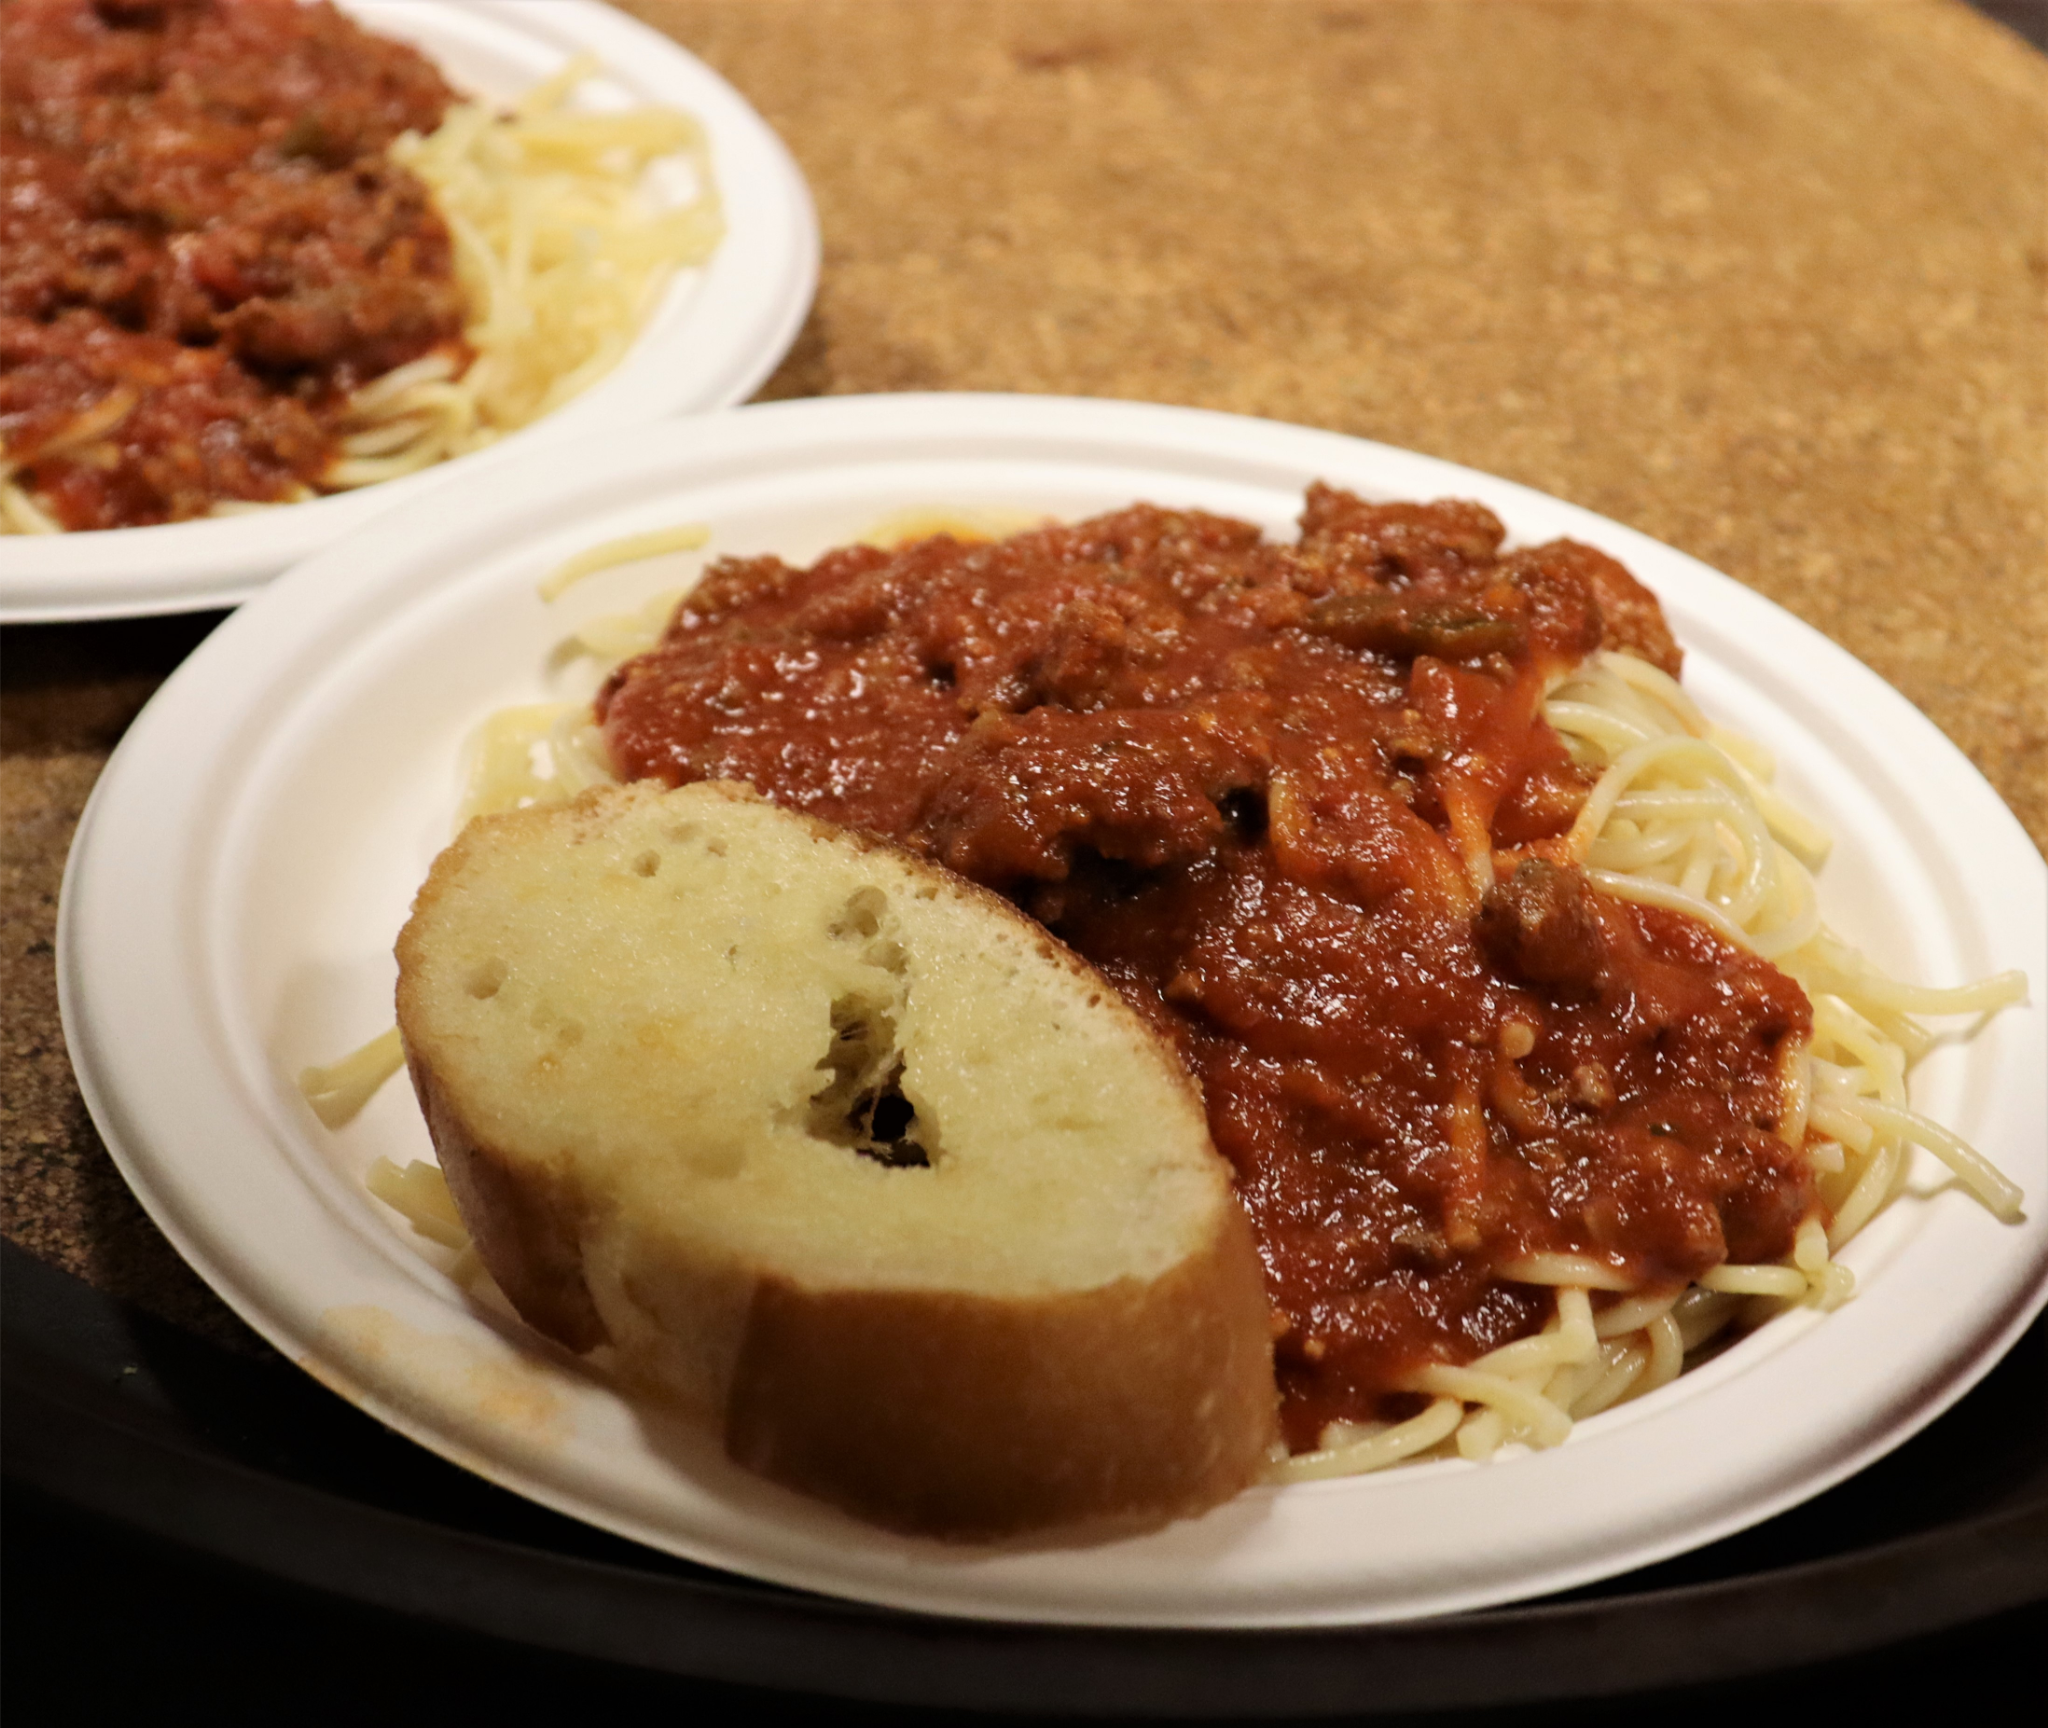 A plate of spaghetti from last years spaghetti dinner